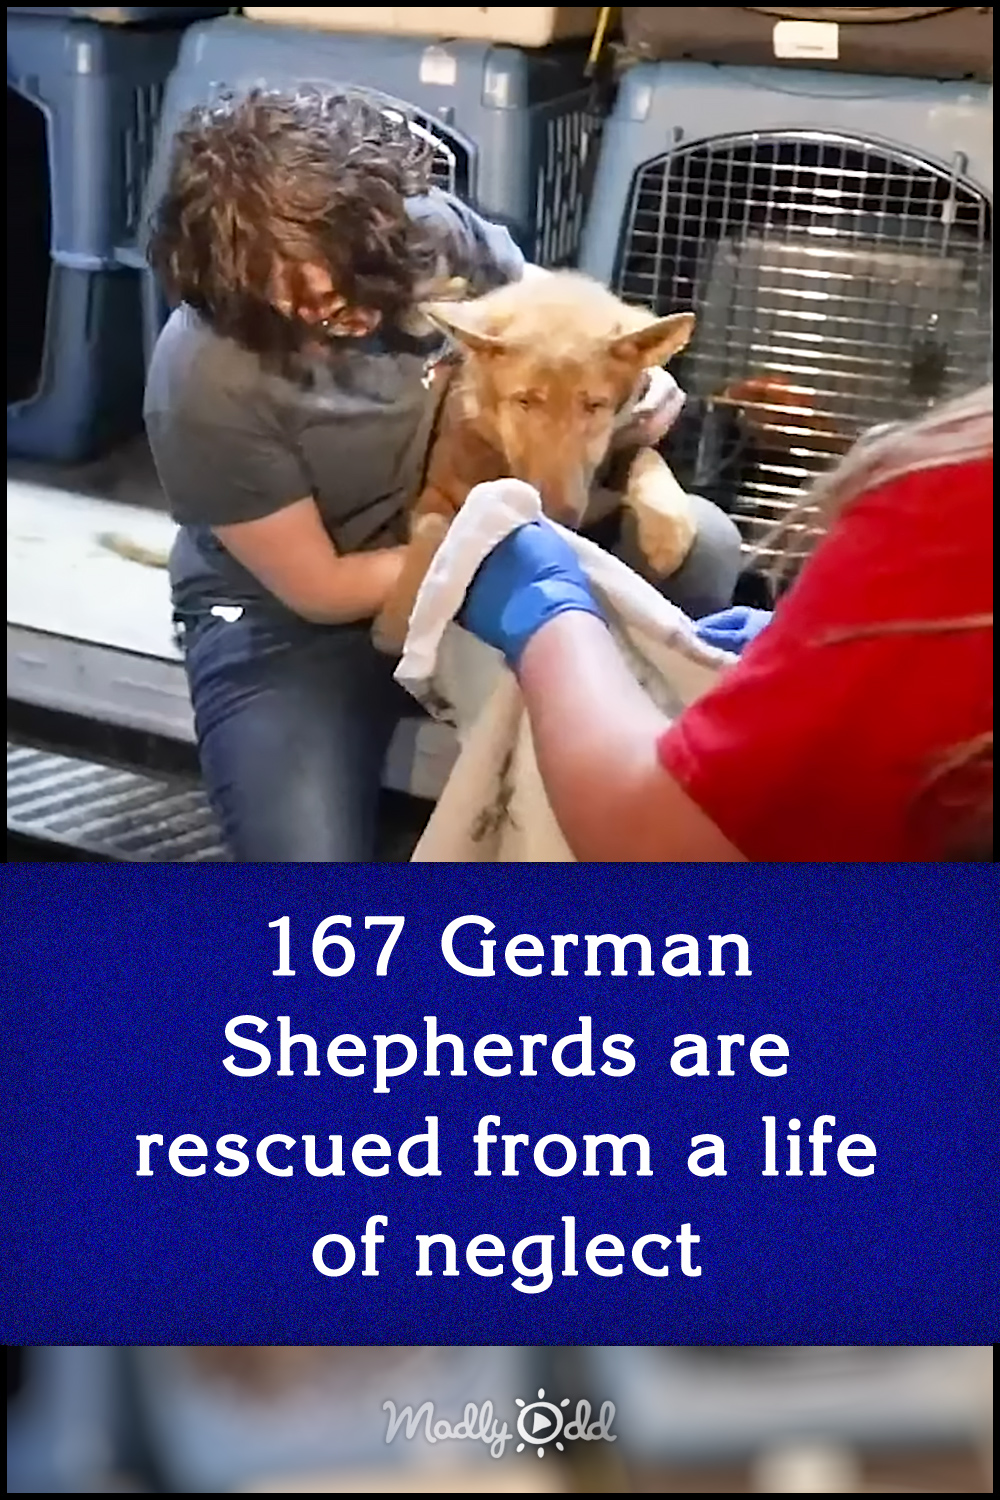 167 German Shepherds are rescued from a life of neglect